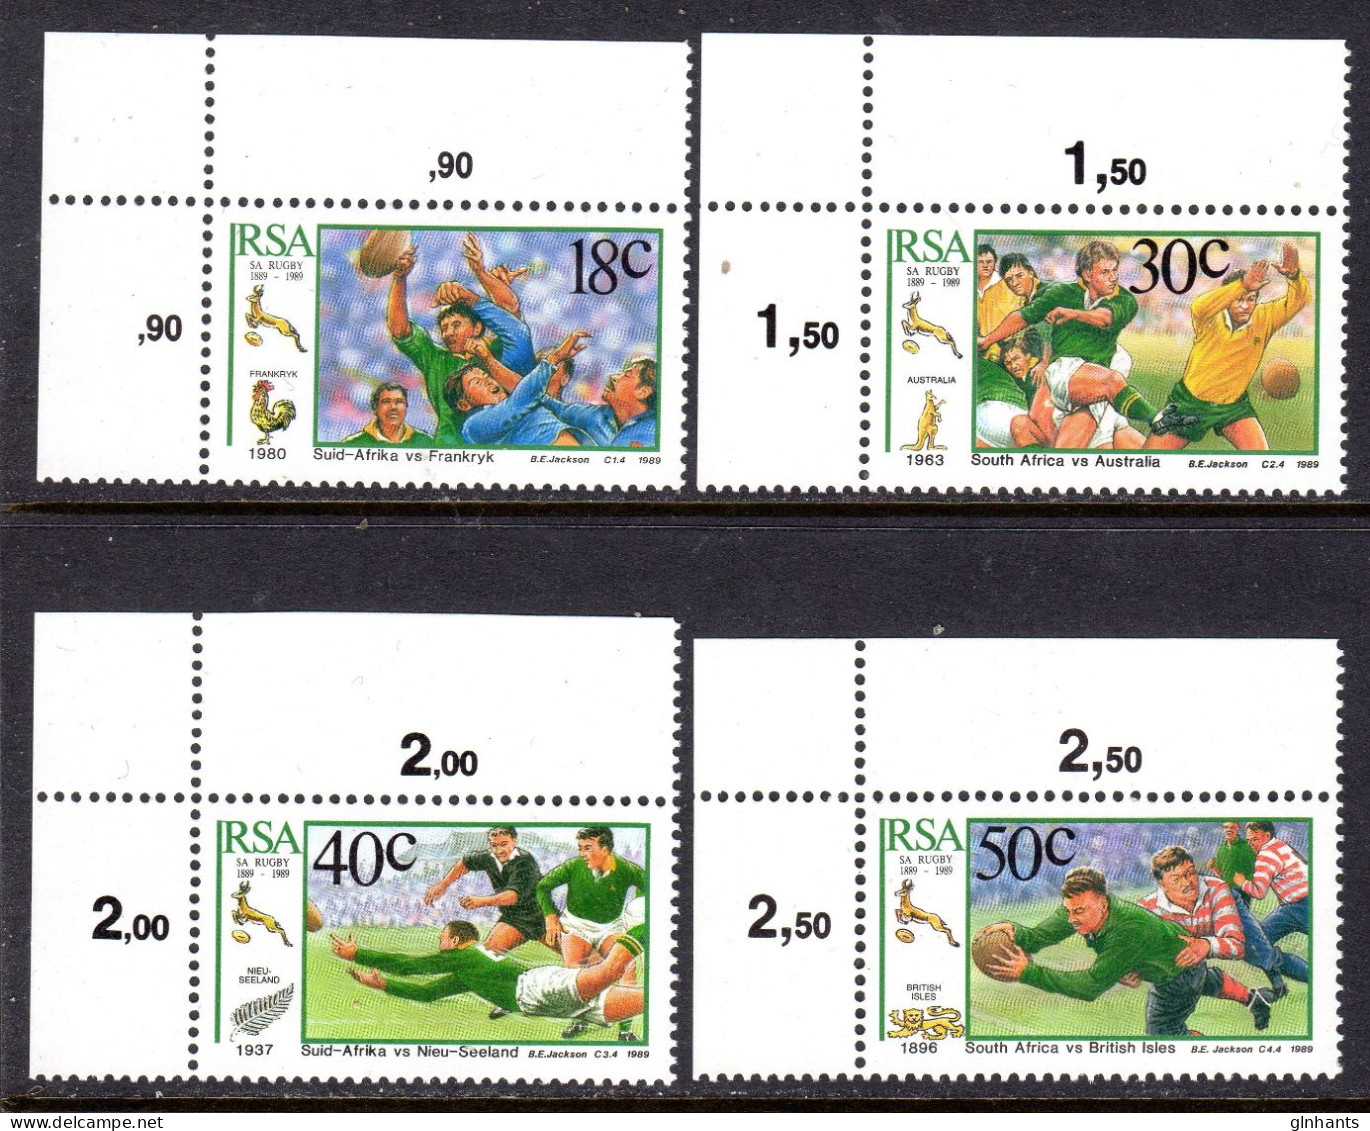 SOUTH AFRICA - 1989 RUGBY ANNIVERSARY SET (4V) FINE MNH ** SG 685-688 - Unused Stamps